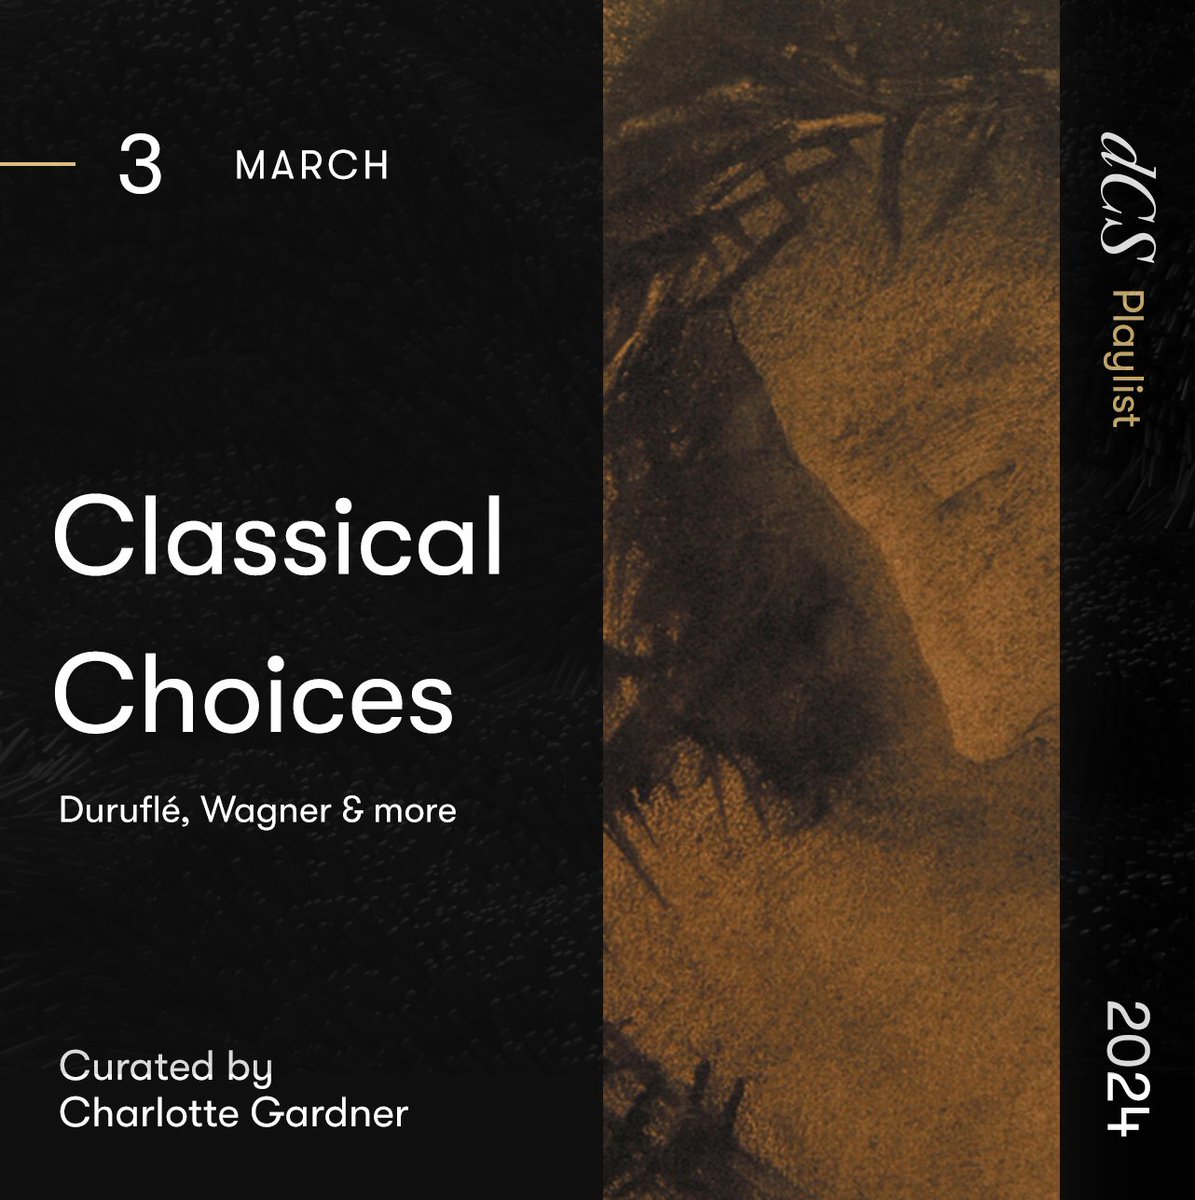 Our latest Easter-themed Classical Choices playlist is here- featuring #Duruflé, #Wagner & more... Curated by @chargard2 Read more & listen now at the dCS Edit: dcsaudio.com/edit/classical… #classicalmusic #classicalplaylist